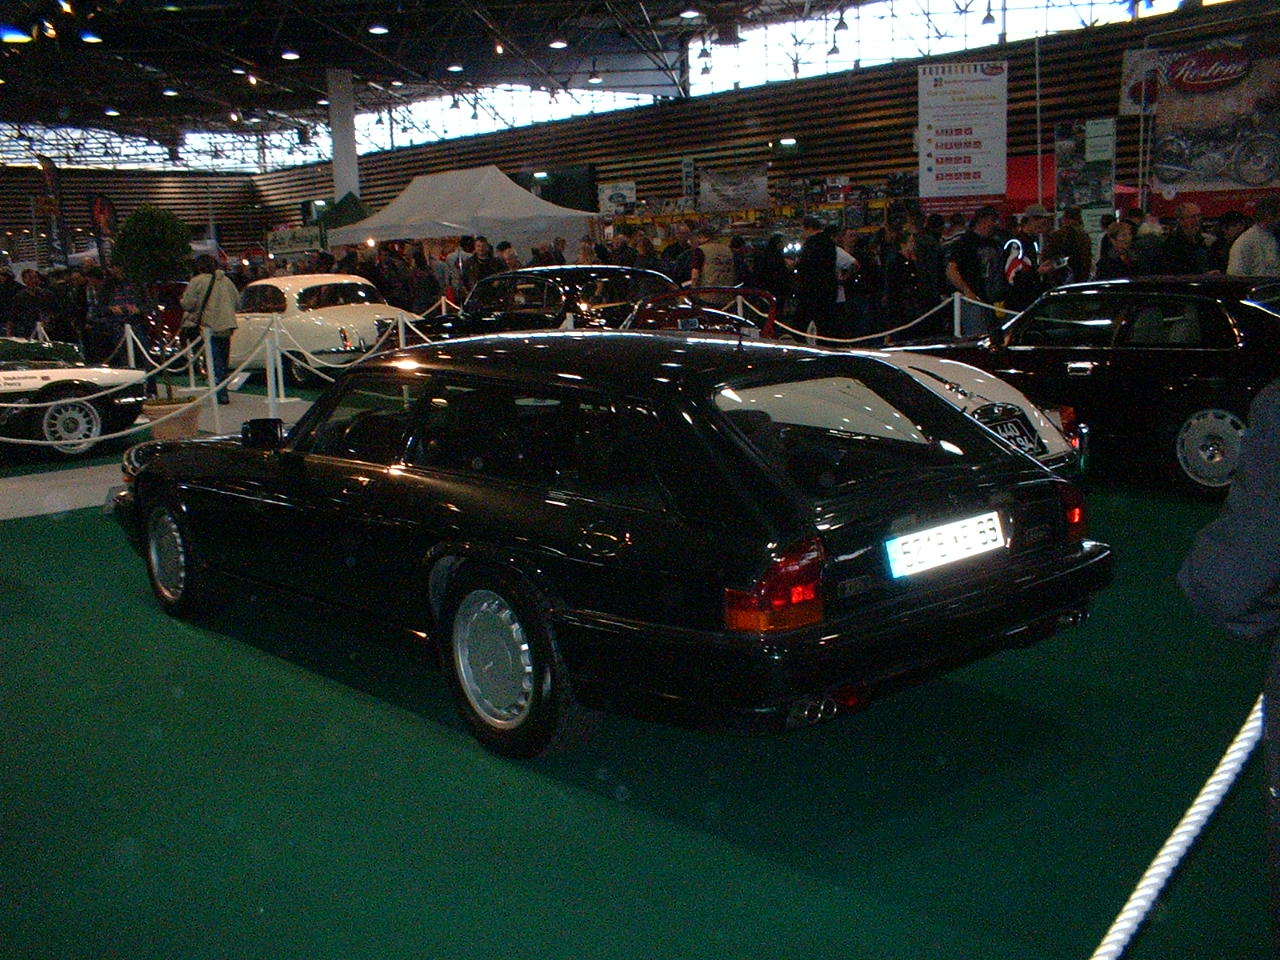  Eventer n°57 XJR-S - Page 2 111106090710500089014632